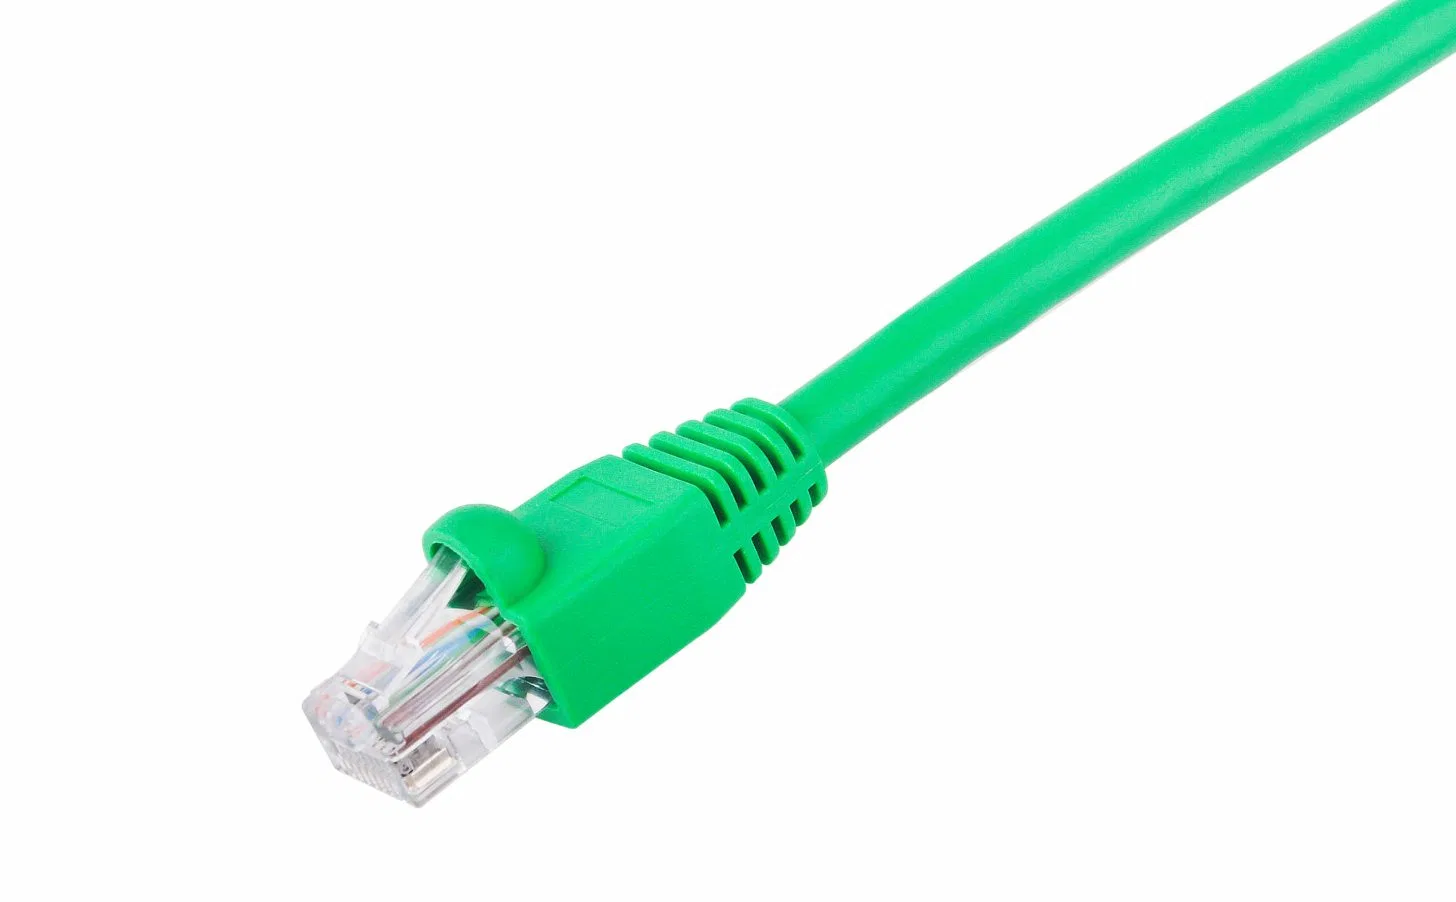 Network Cable LAN Cable Ethernet Cable Patch Cord Patch Cable